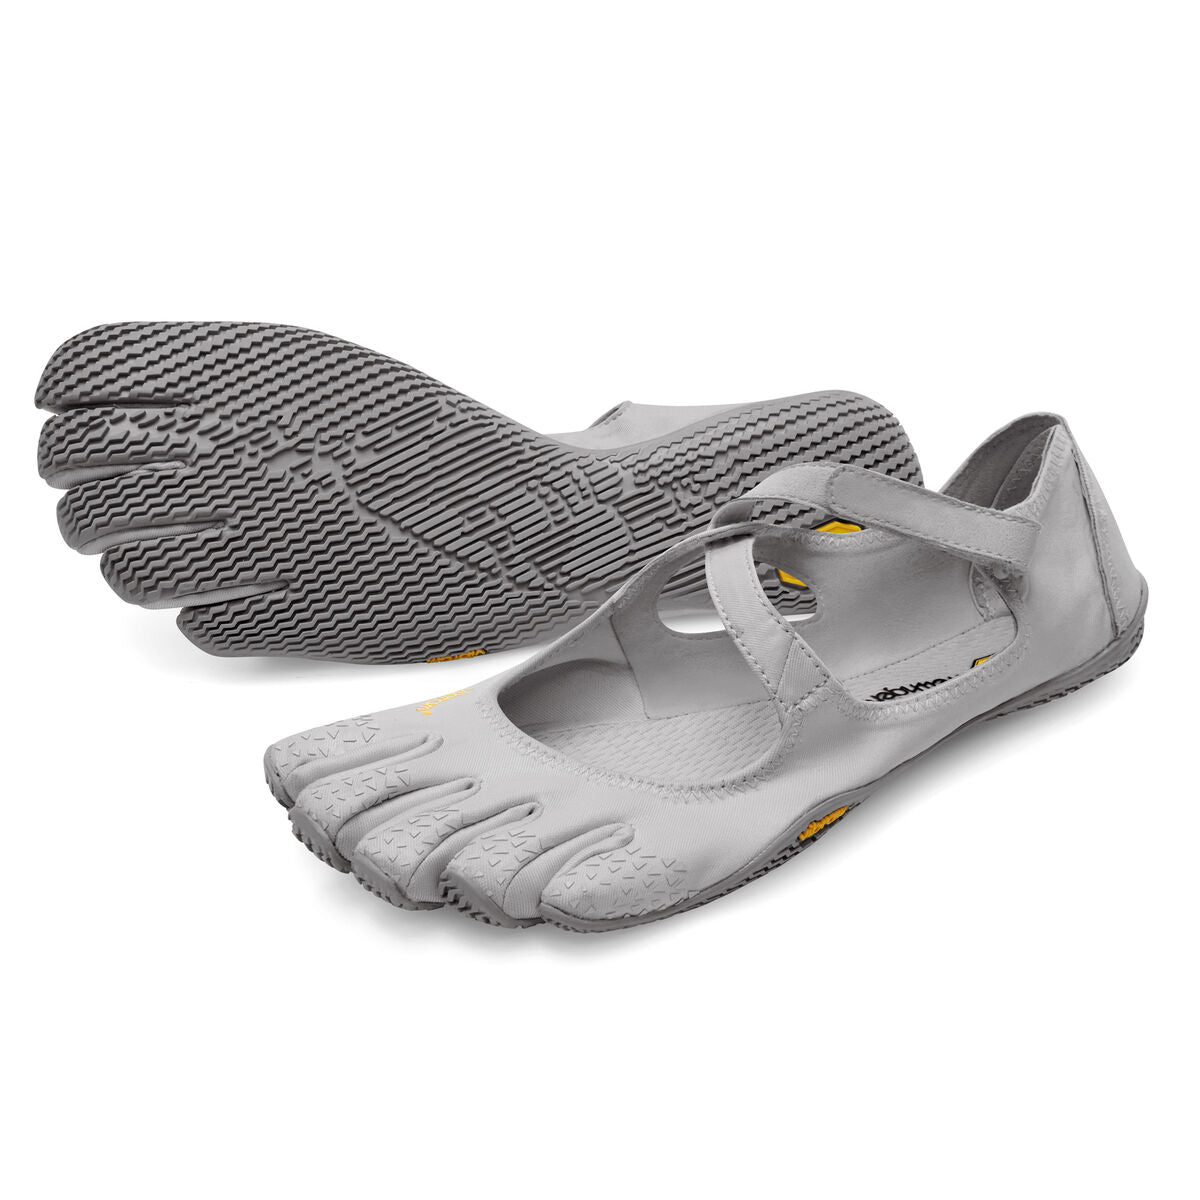 Women's Vibram Five Fingers V-Soul Training Shoe in Silver from the front